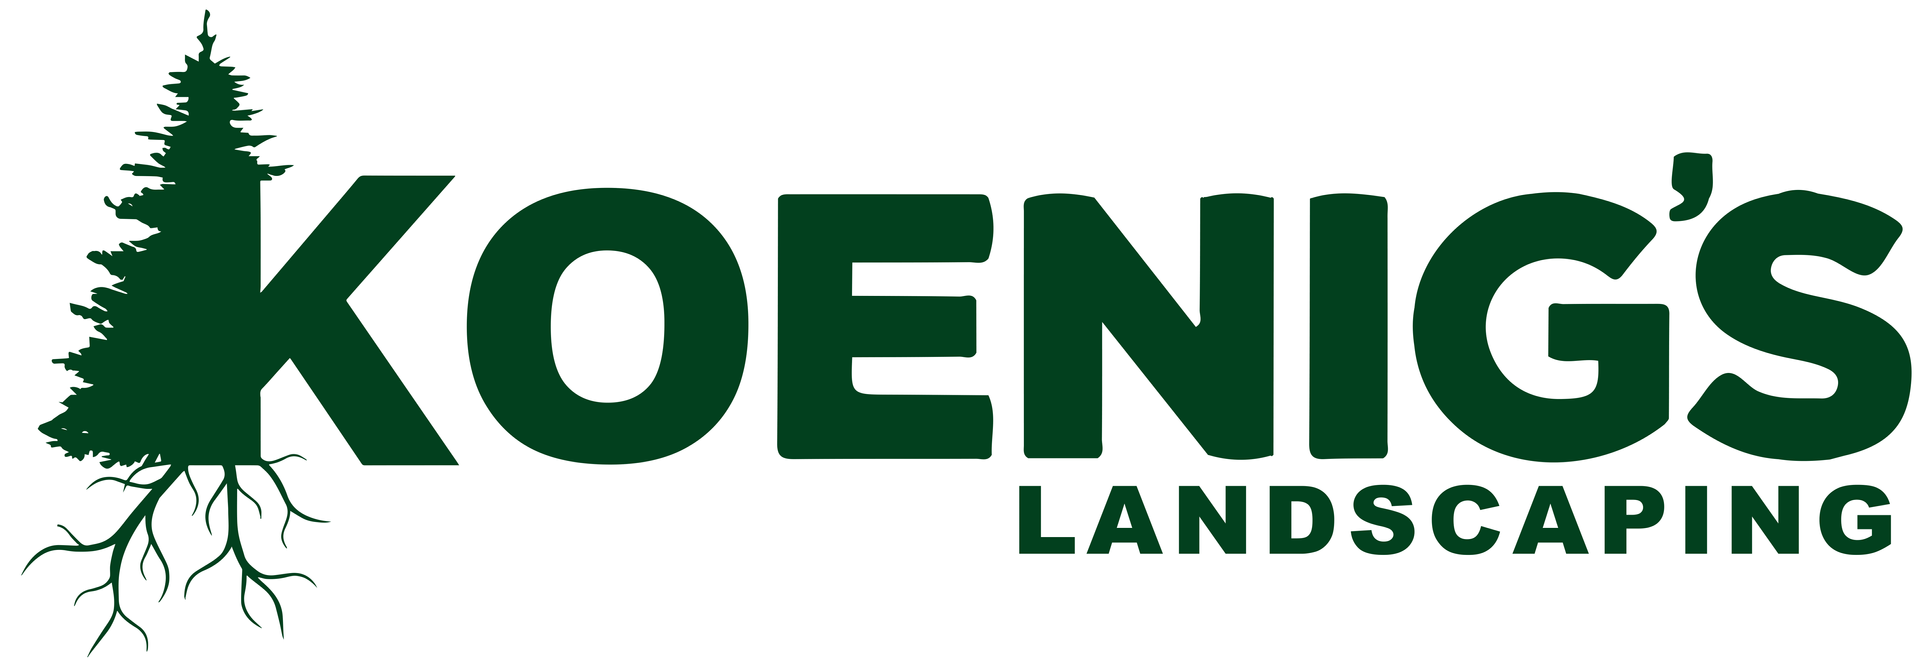 A logo for koenig 's landscaping with a pine tree in the middle.